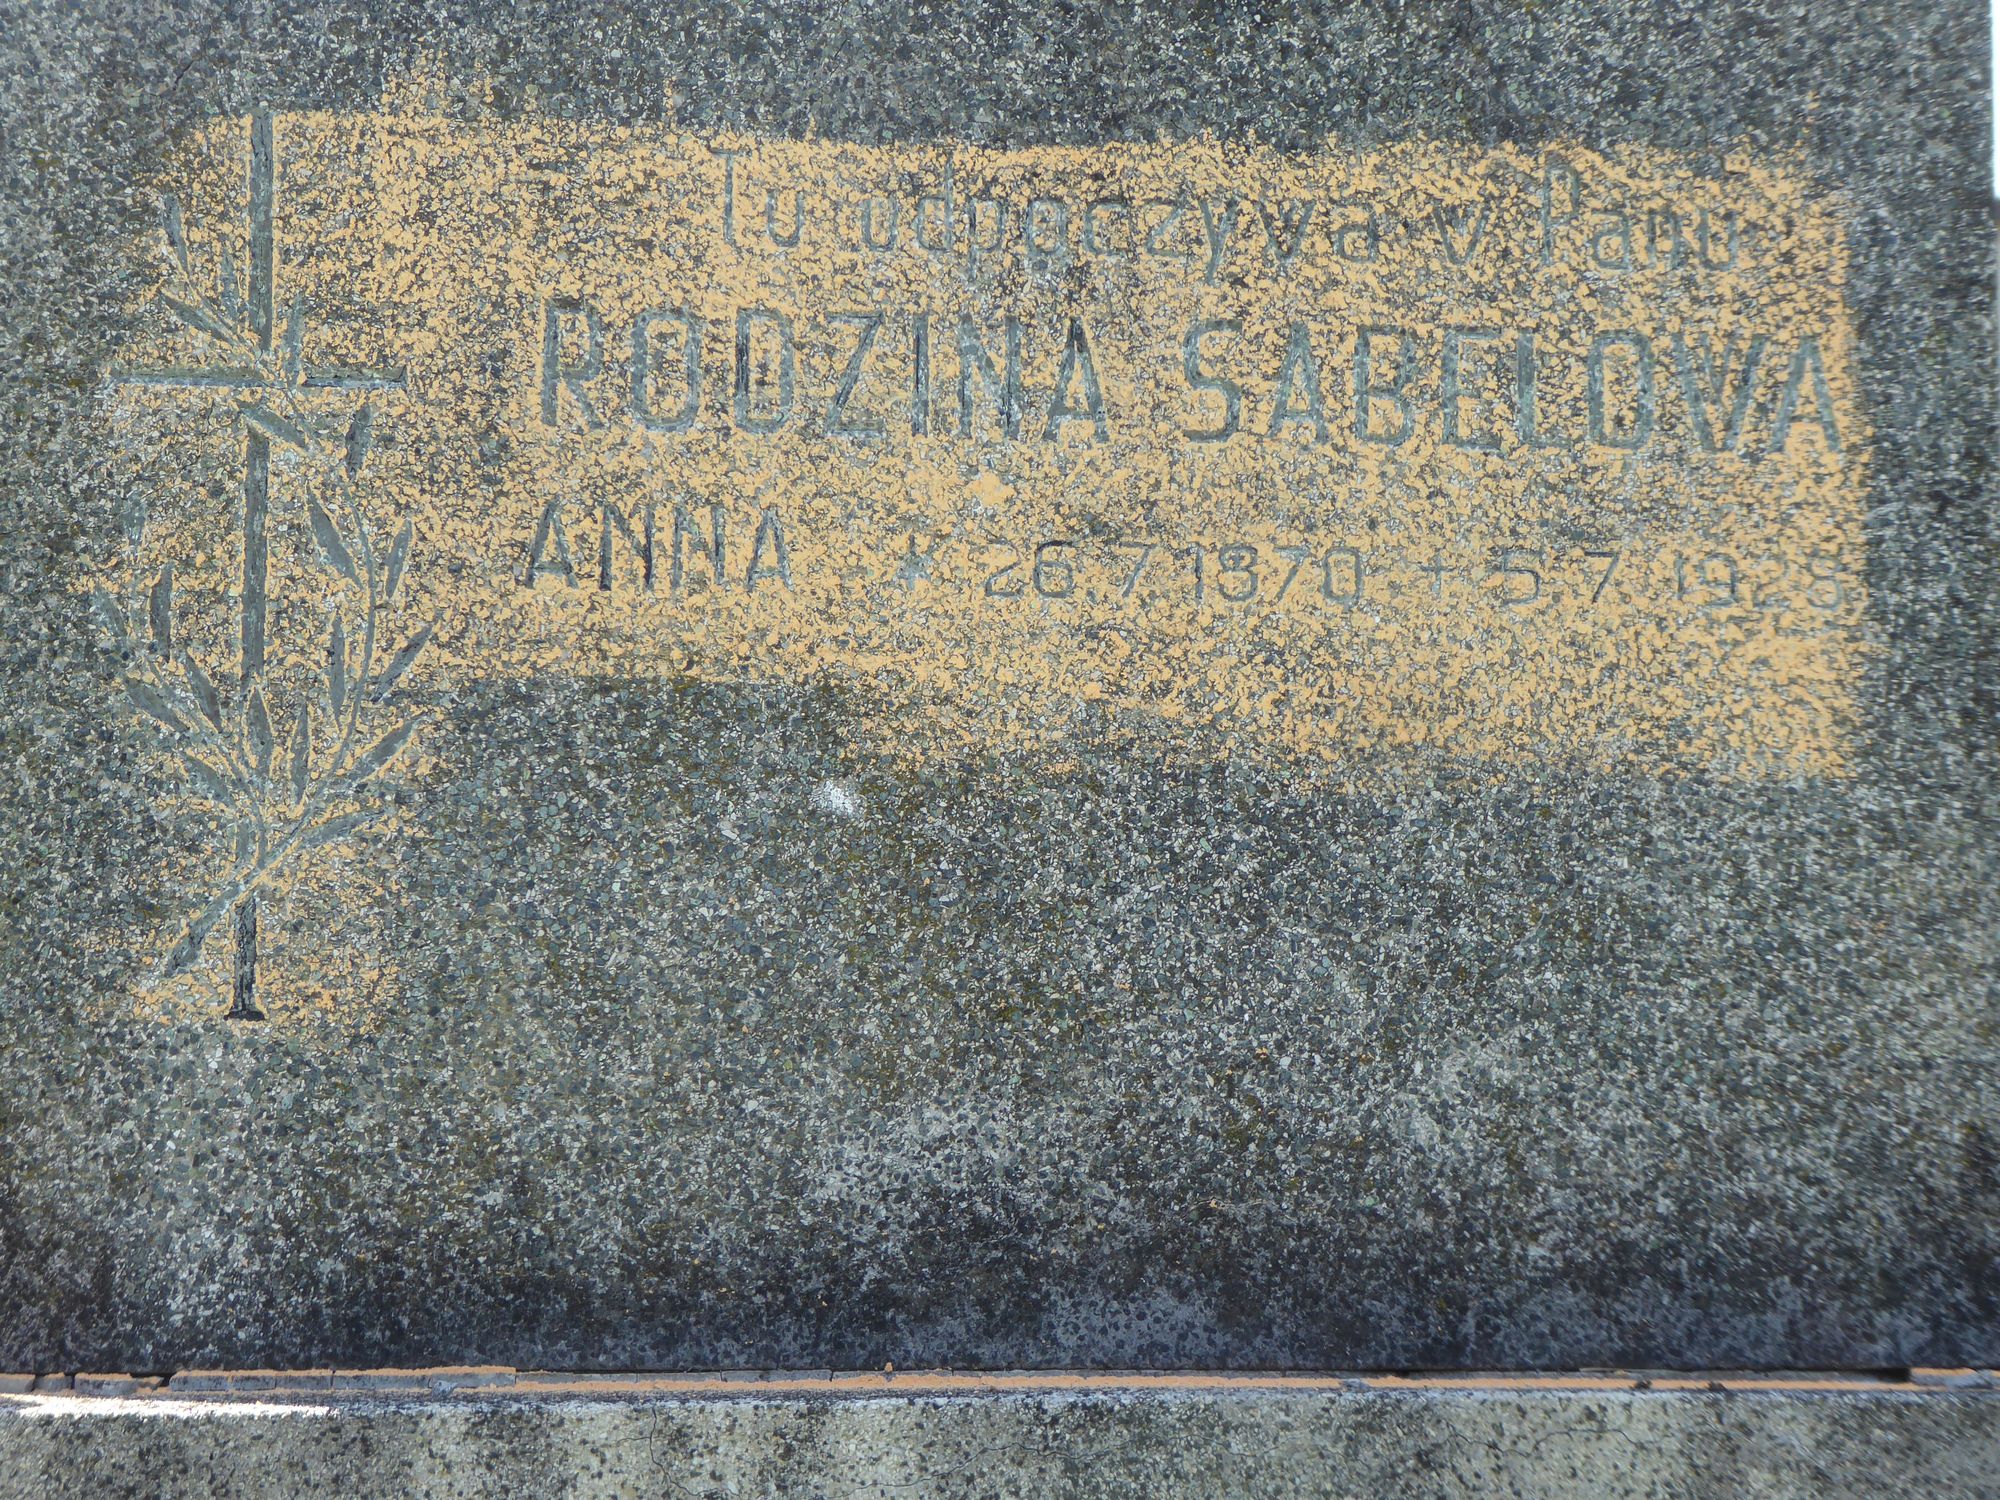 Fragment of a tombstone of the Sabelová family from the cemeteries of the Czech part of Těšín Silesia, as of 2022.